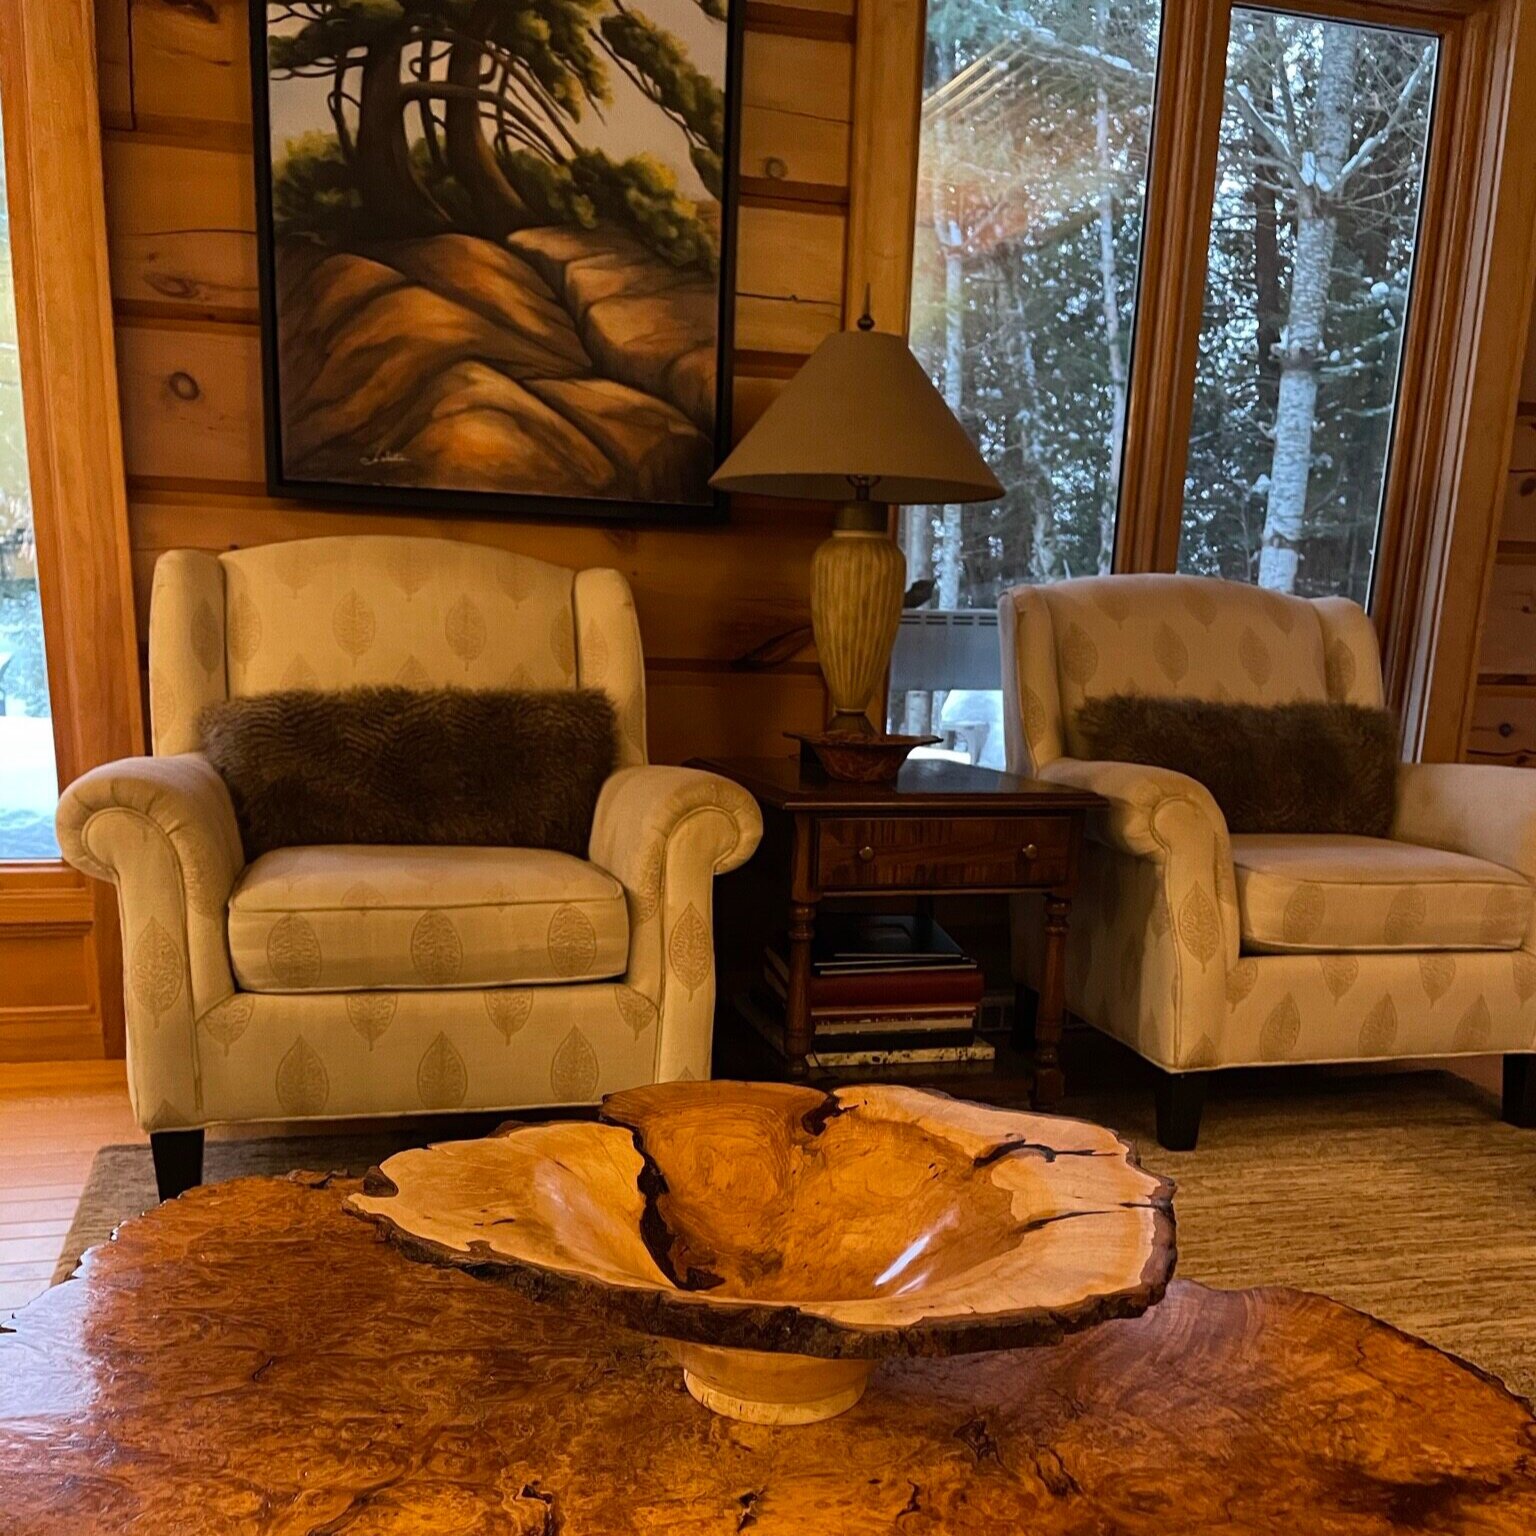  Burl art is unique and meaningful when displayed in your home. We connect to nature and feel grounded by natural beauty of the forest.  